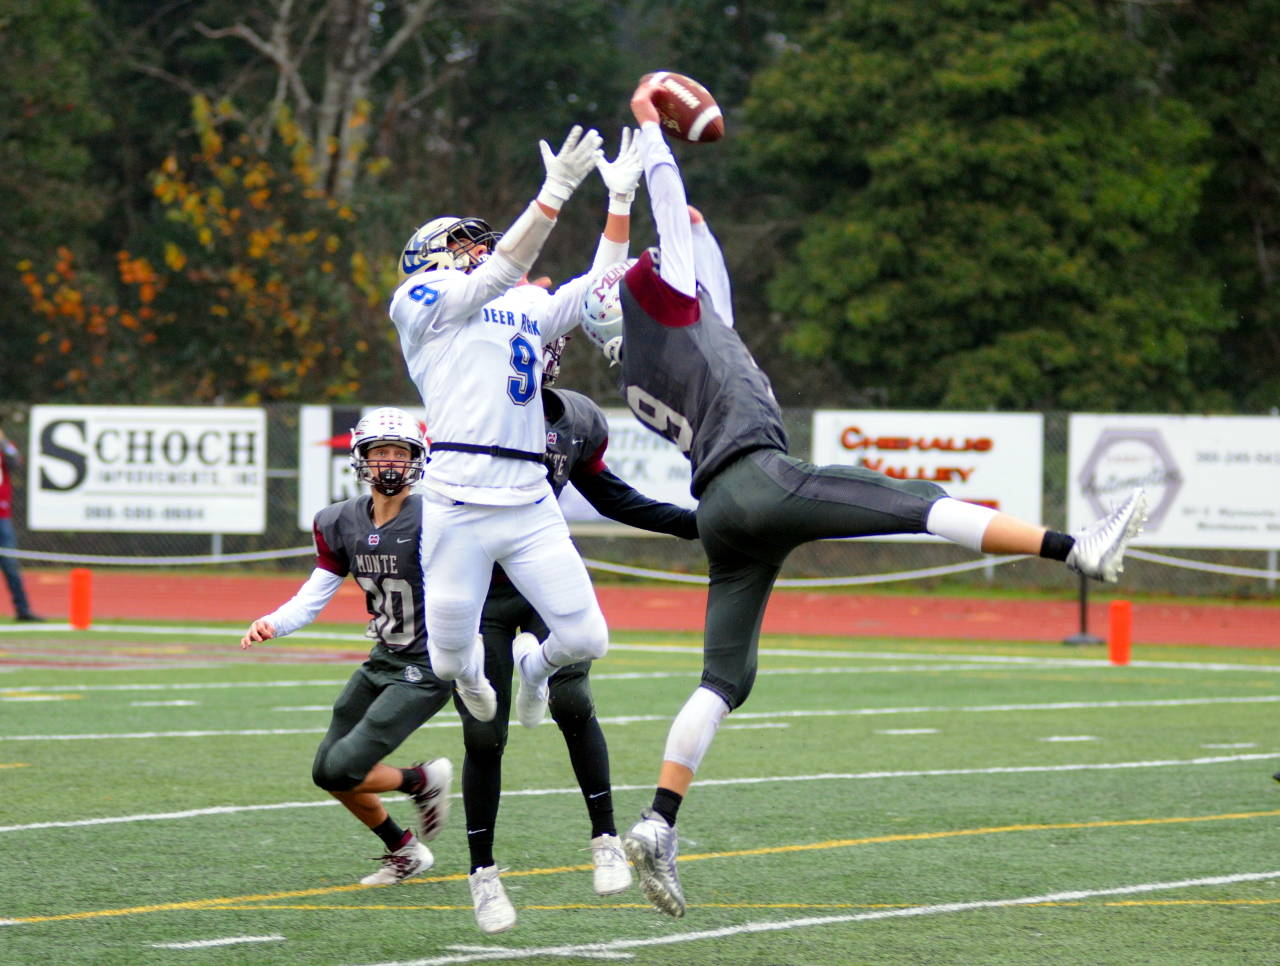 Montesano defender Braden Dohrmann, right, deflects a pass intended for Deer Park receiver Dylan Hall during Montesano’s 20-17 loss in a 1A State Tournament quarterfinal game on Saturday at Jack Rottle Field in Montesano. (Ryan Sparks | Grays Harbor News Group)